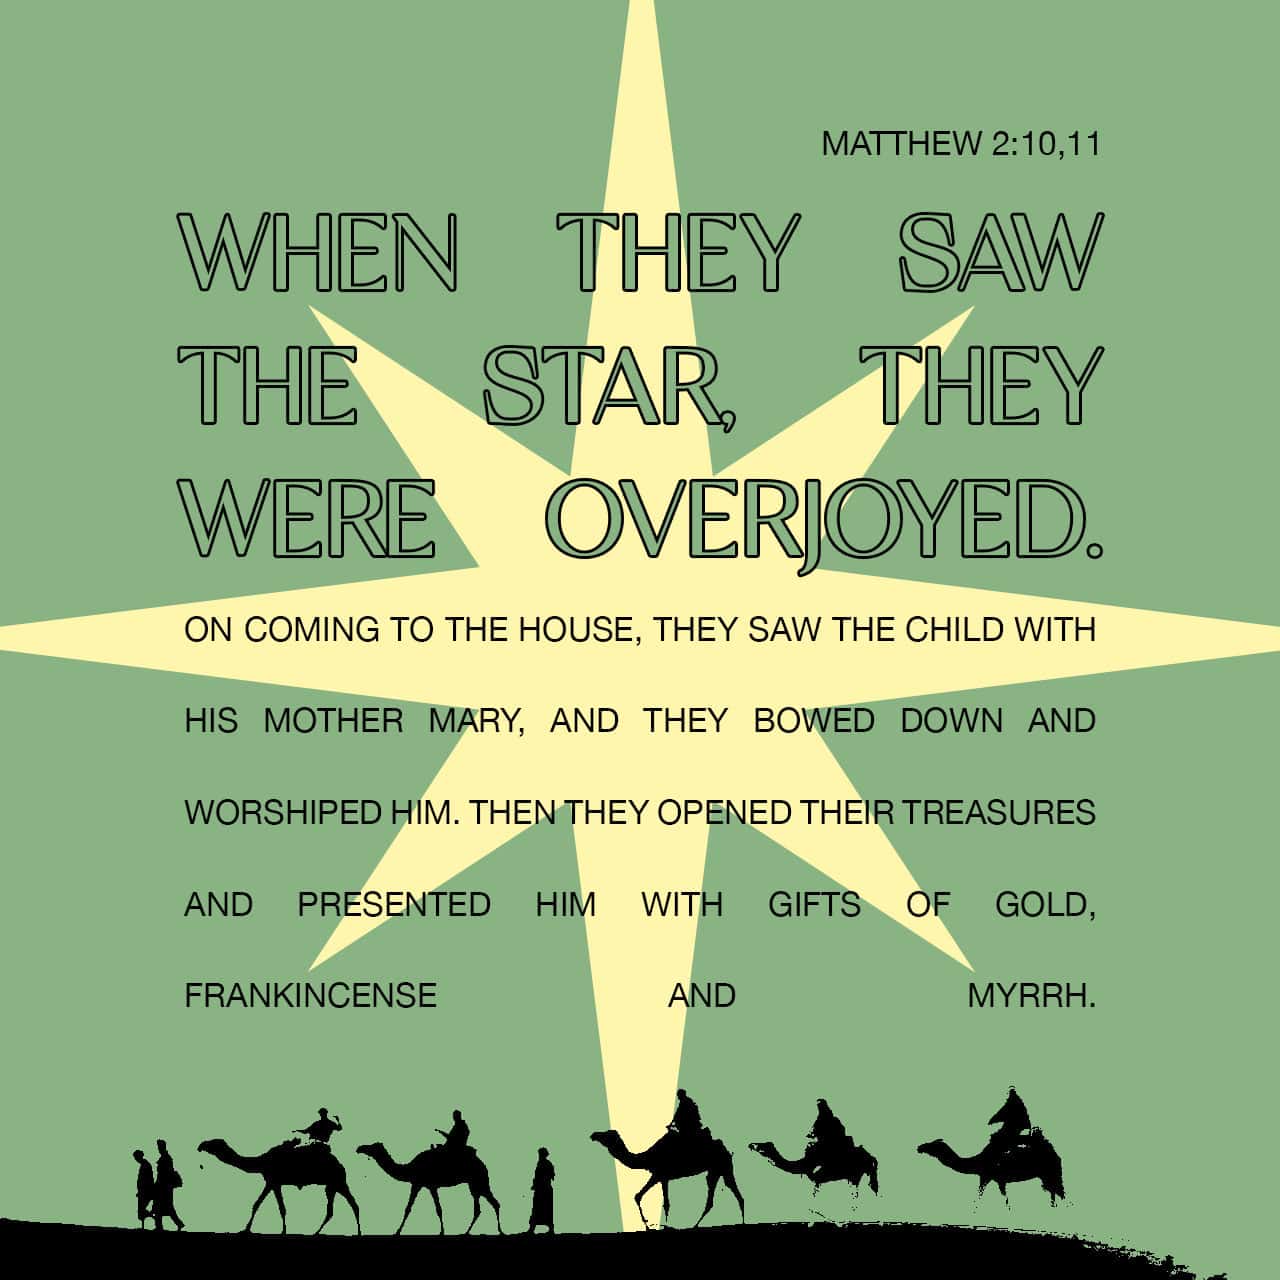 Matthew 2:11 On coming to the house, they saw the child with his